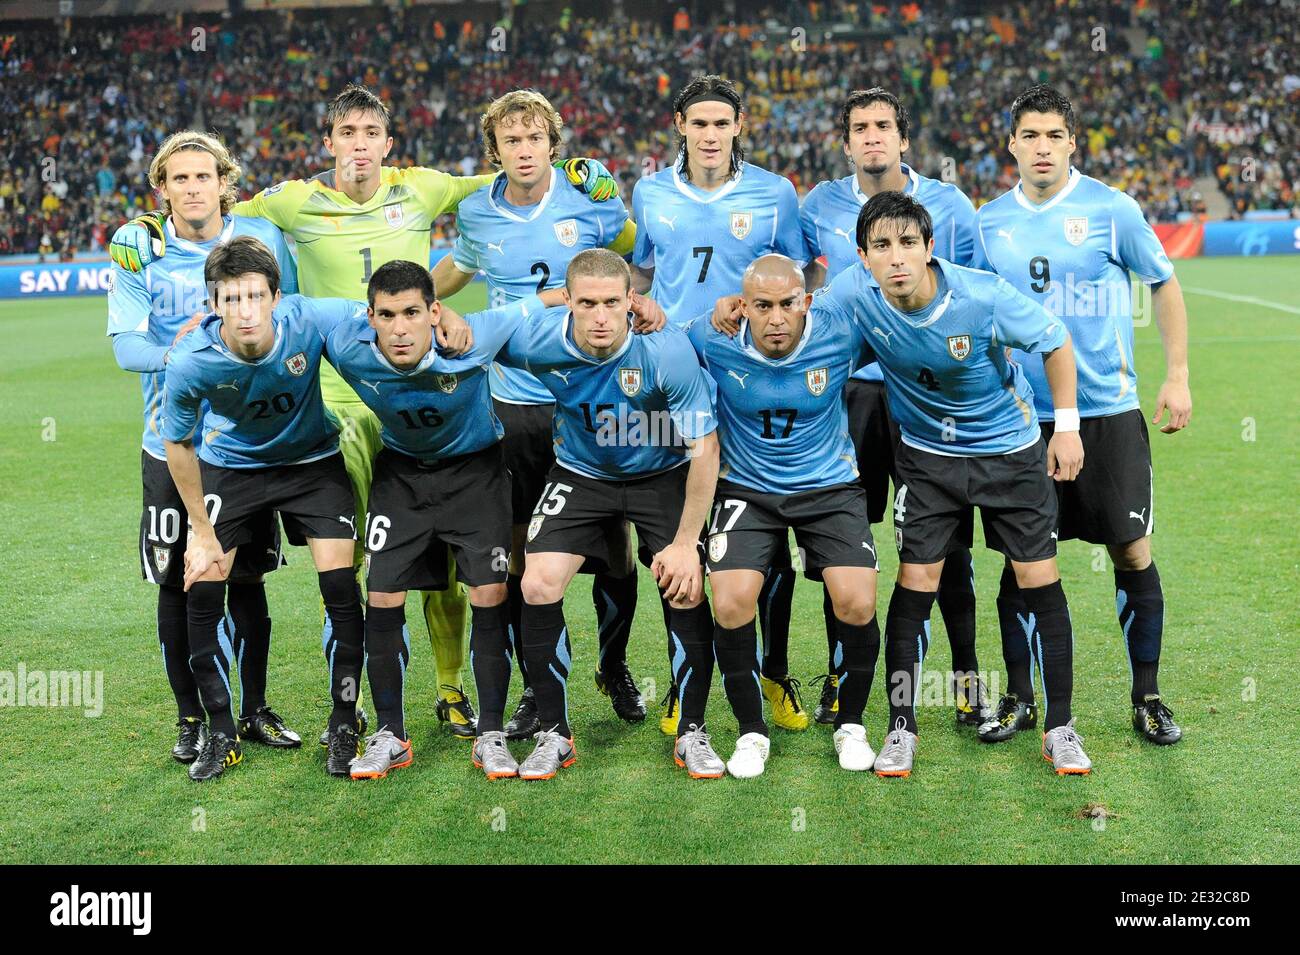 Uruguay National football Team group during the 2010 FIFA World Cup South Africa, Quarter Final, Soccer match, Ghana vs Uruguay at Soccer City football stadium in Johannesburg, South Africa on July 2nd, 2010. Uruguay won 0-0 (5p to 4). Photo by Henri Szwarc/ABACAPRESS.COM Stock Photo